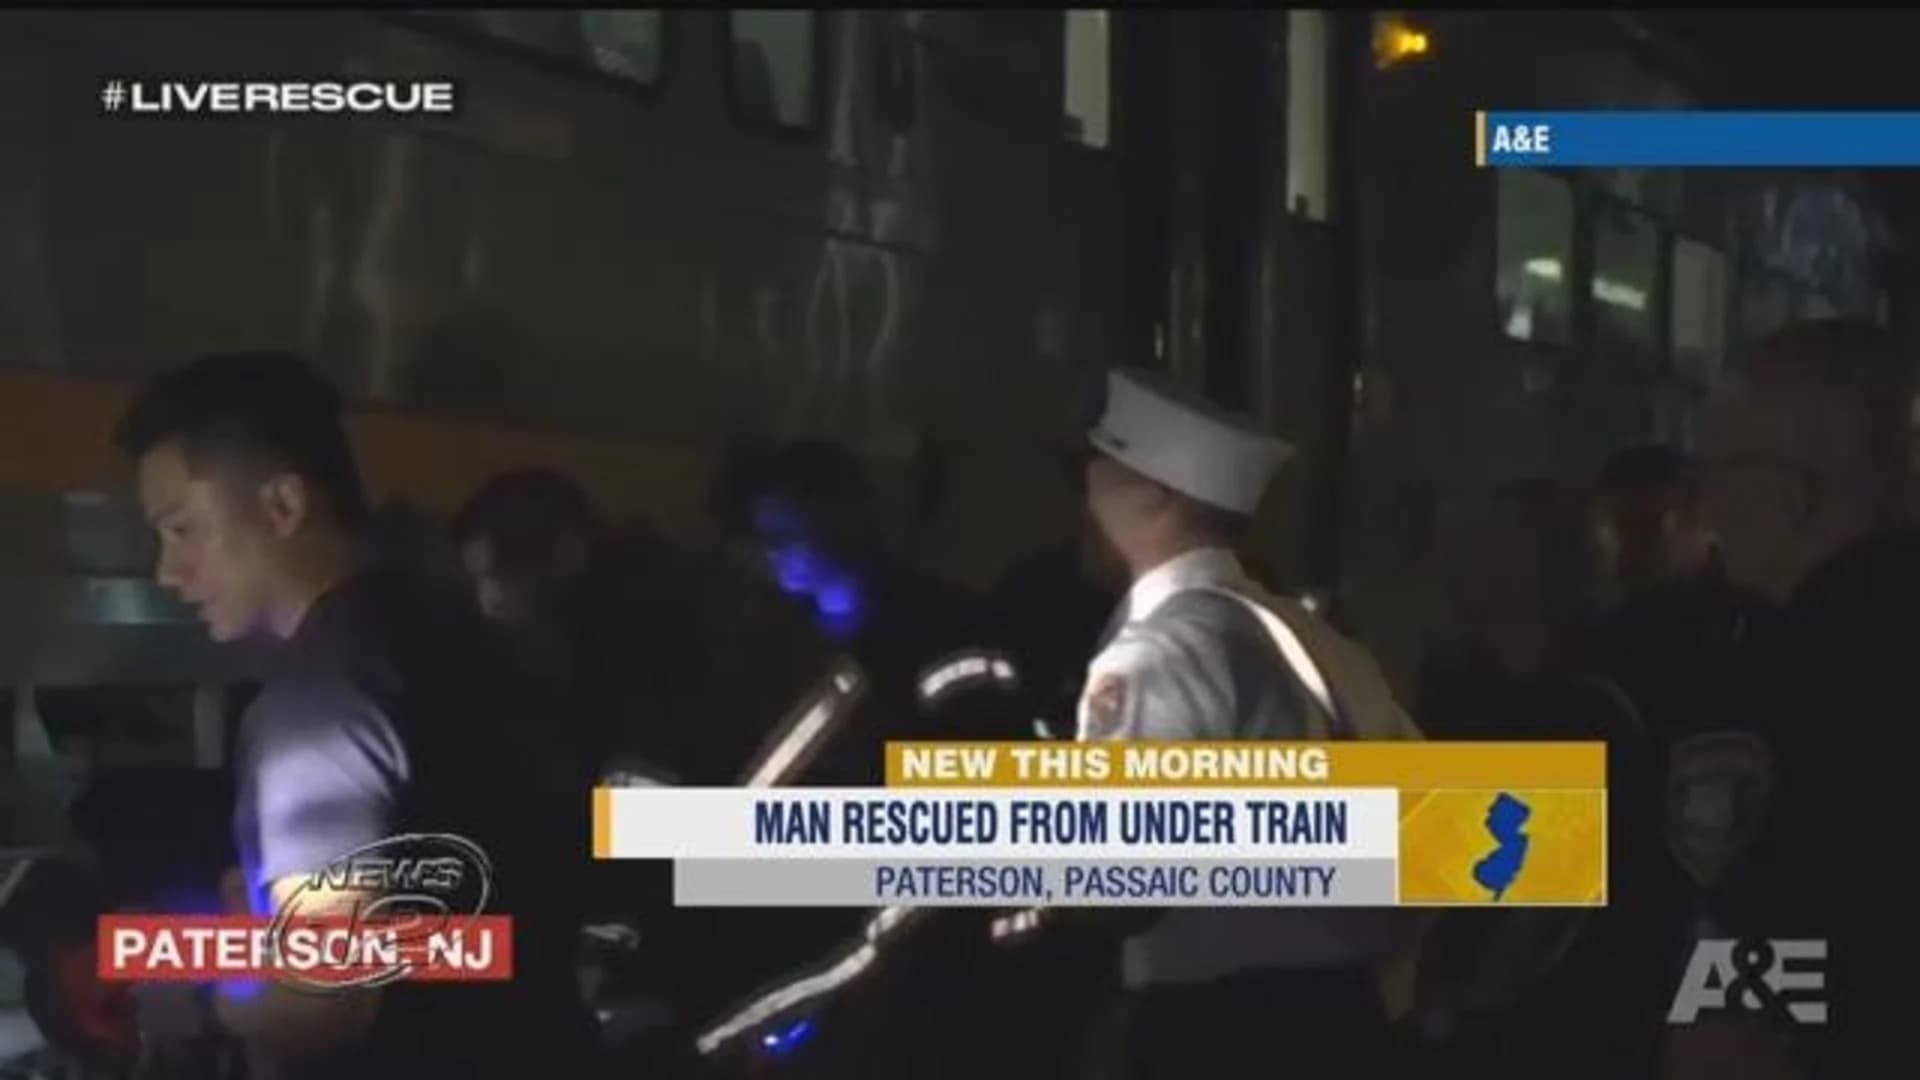 Paterson police rescue man from under train